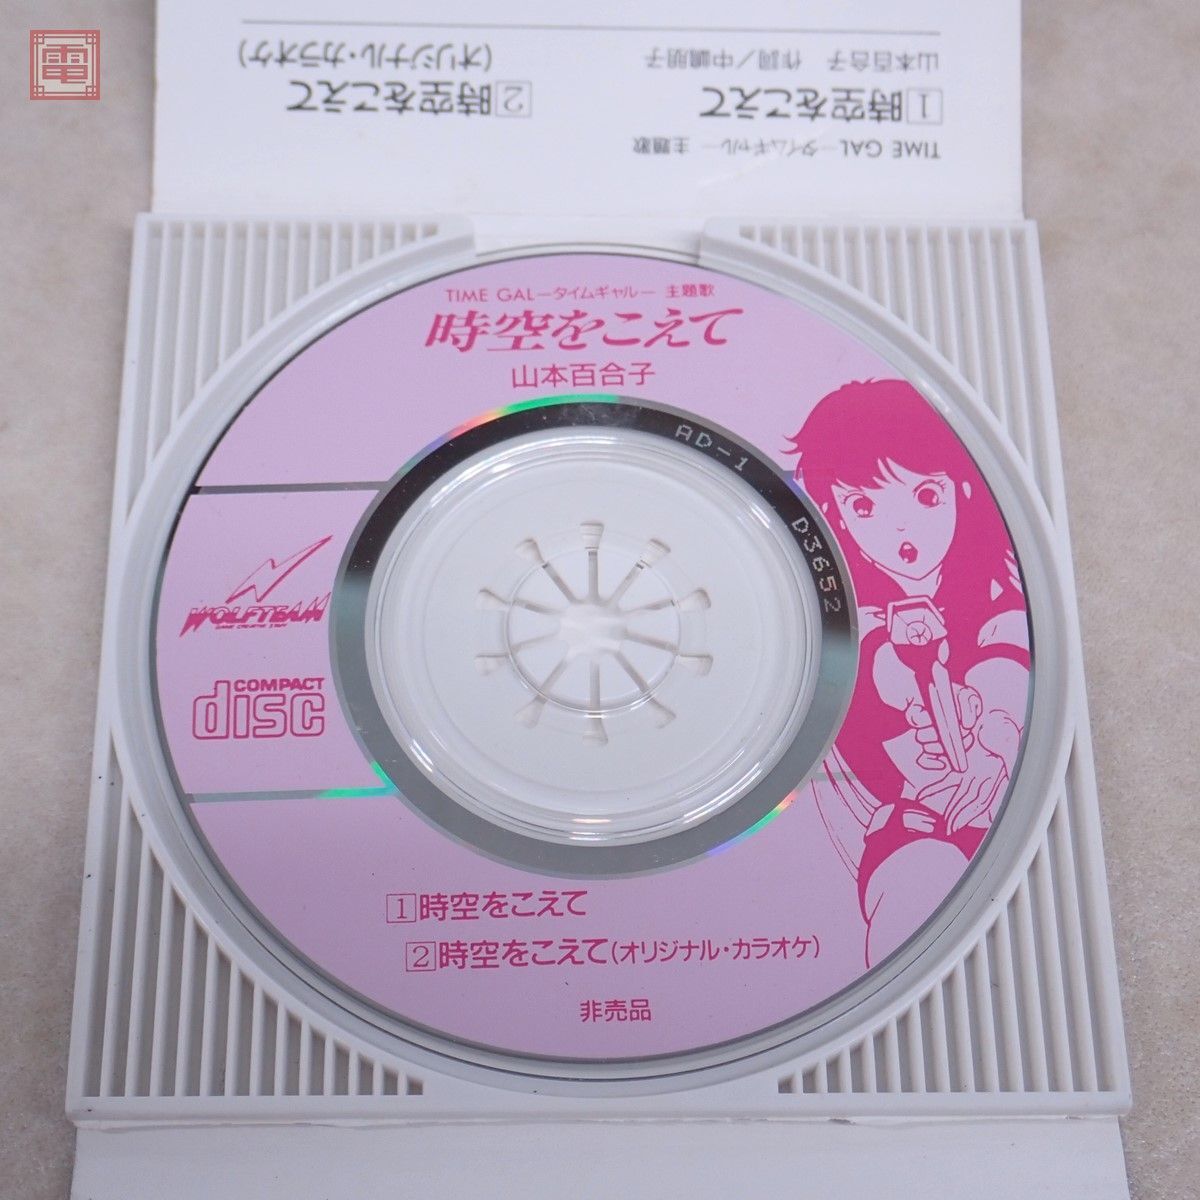  operation guarantee goods CD 8cm single time girl theme music space-time .... Yamamoto 100 ..TIME GAL Tamura confidence two middle ... tight -TAITO Wolf team [10